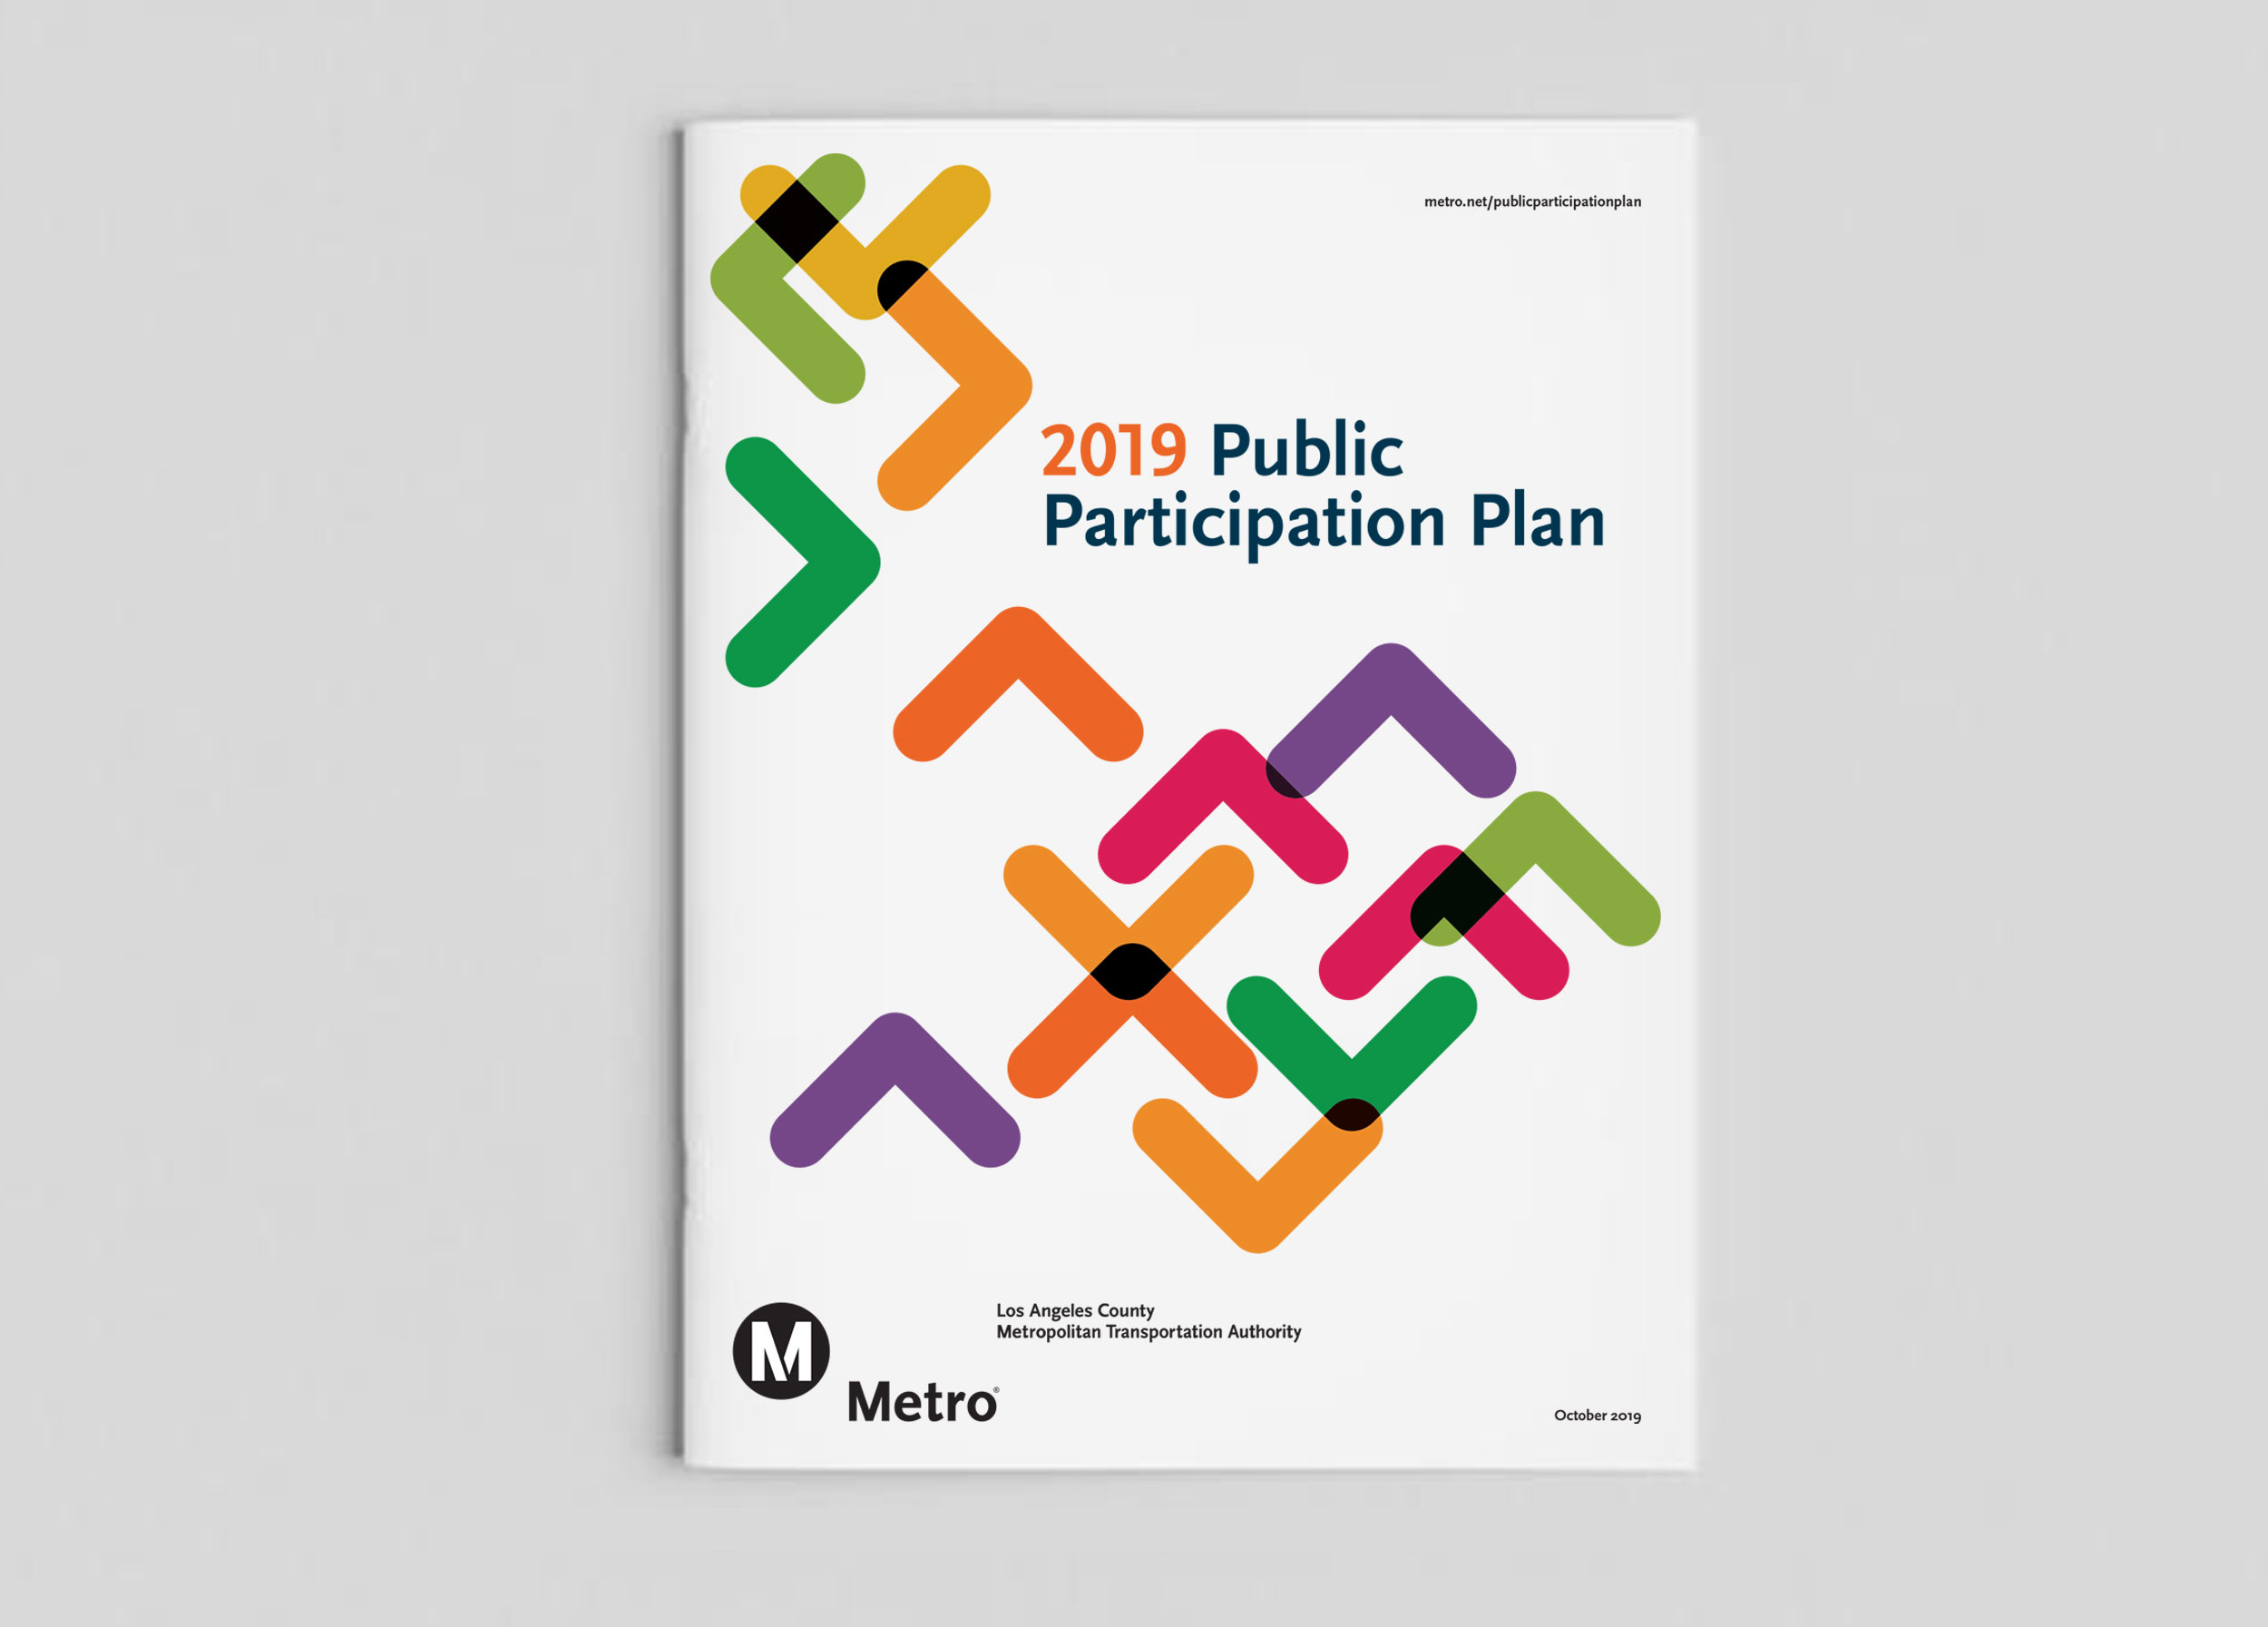 A copy of the Public Participation Plan book lying on a flat surface.